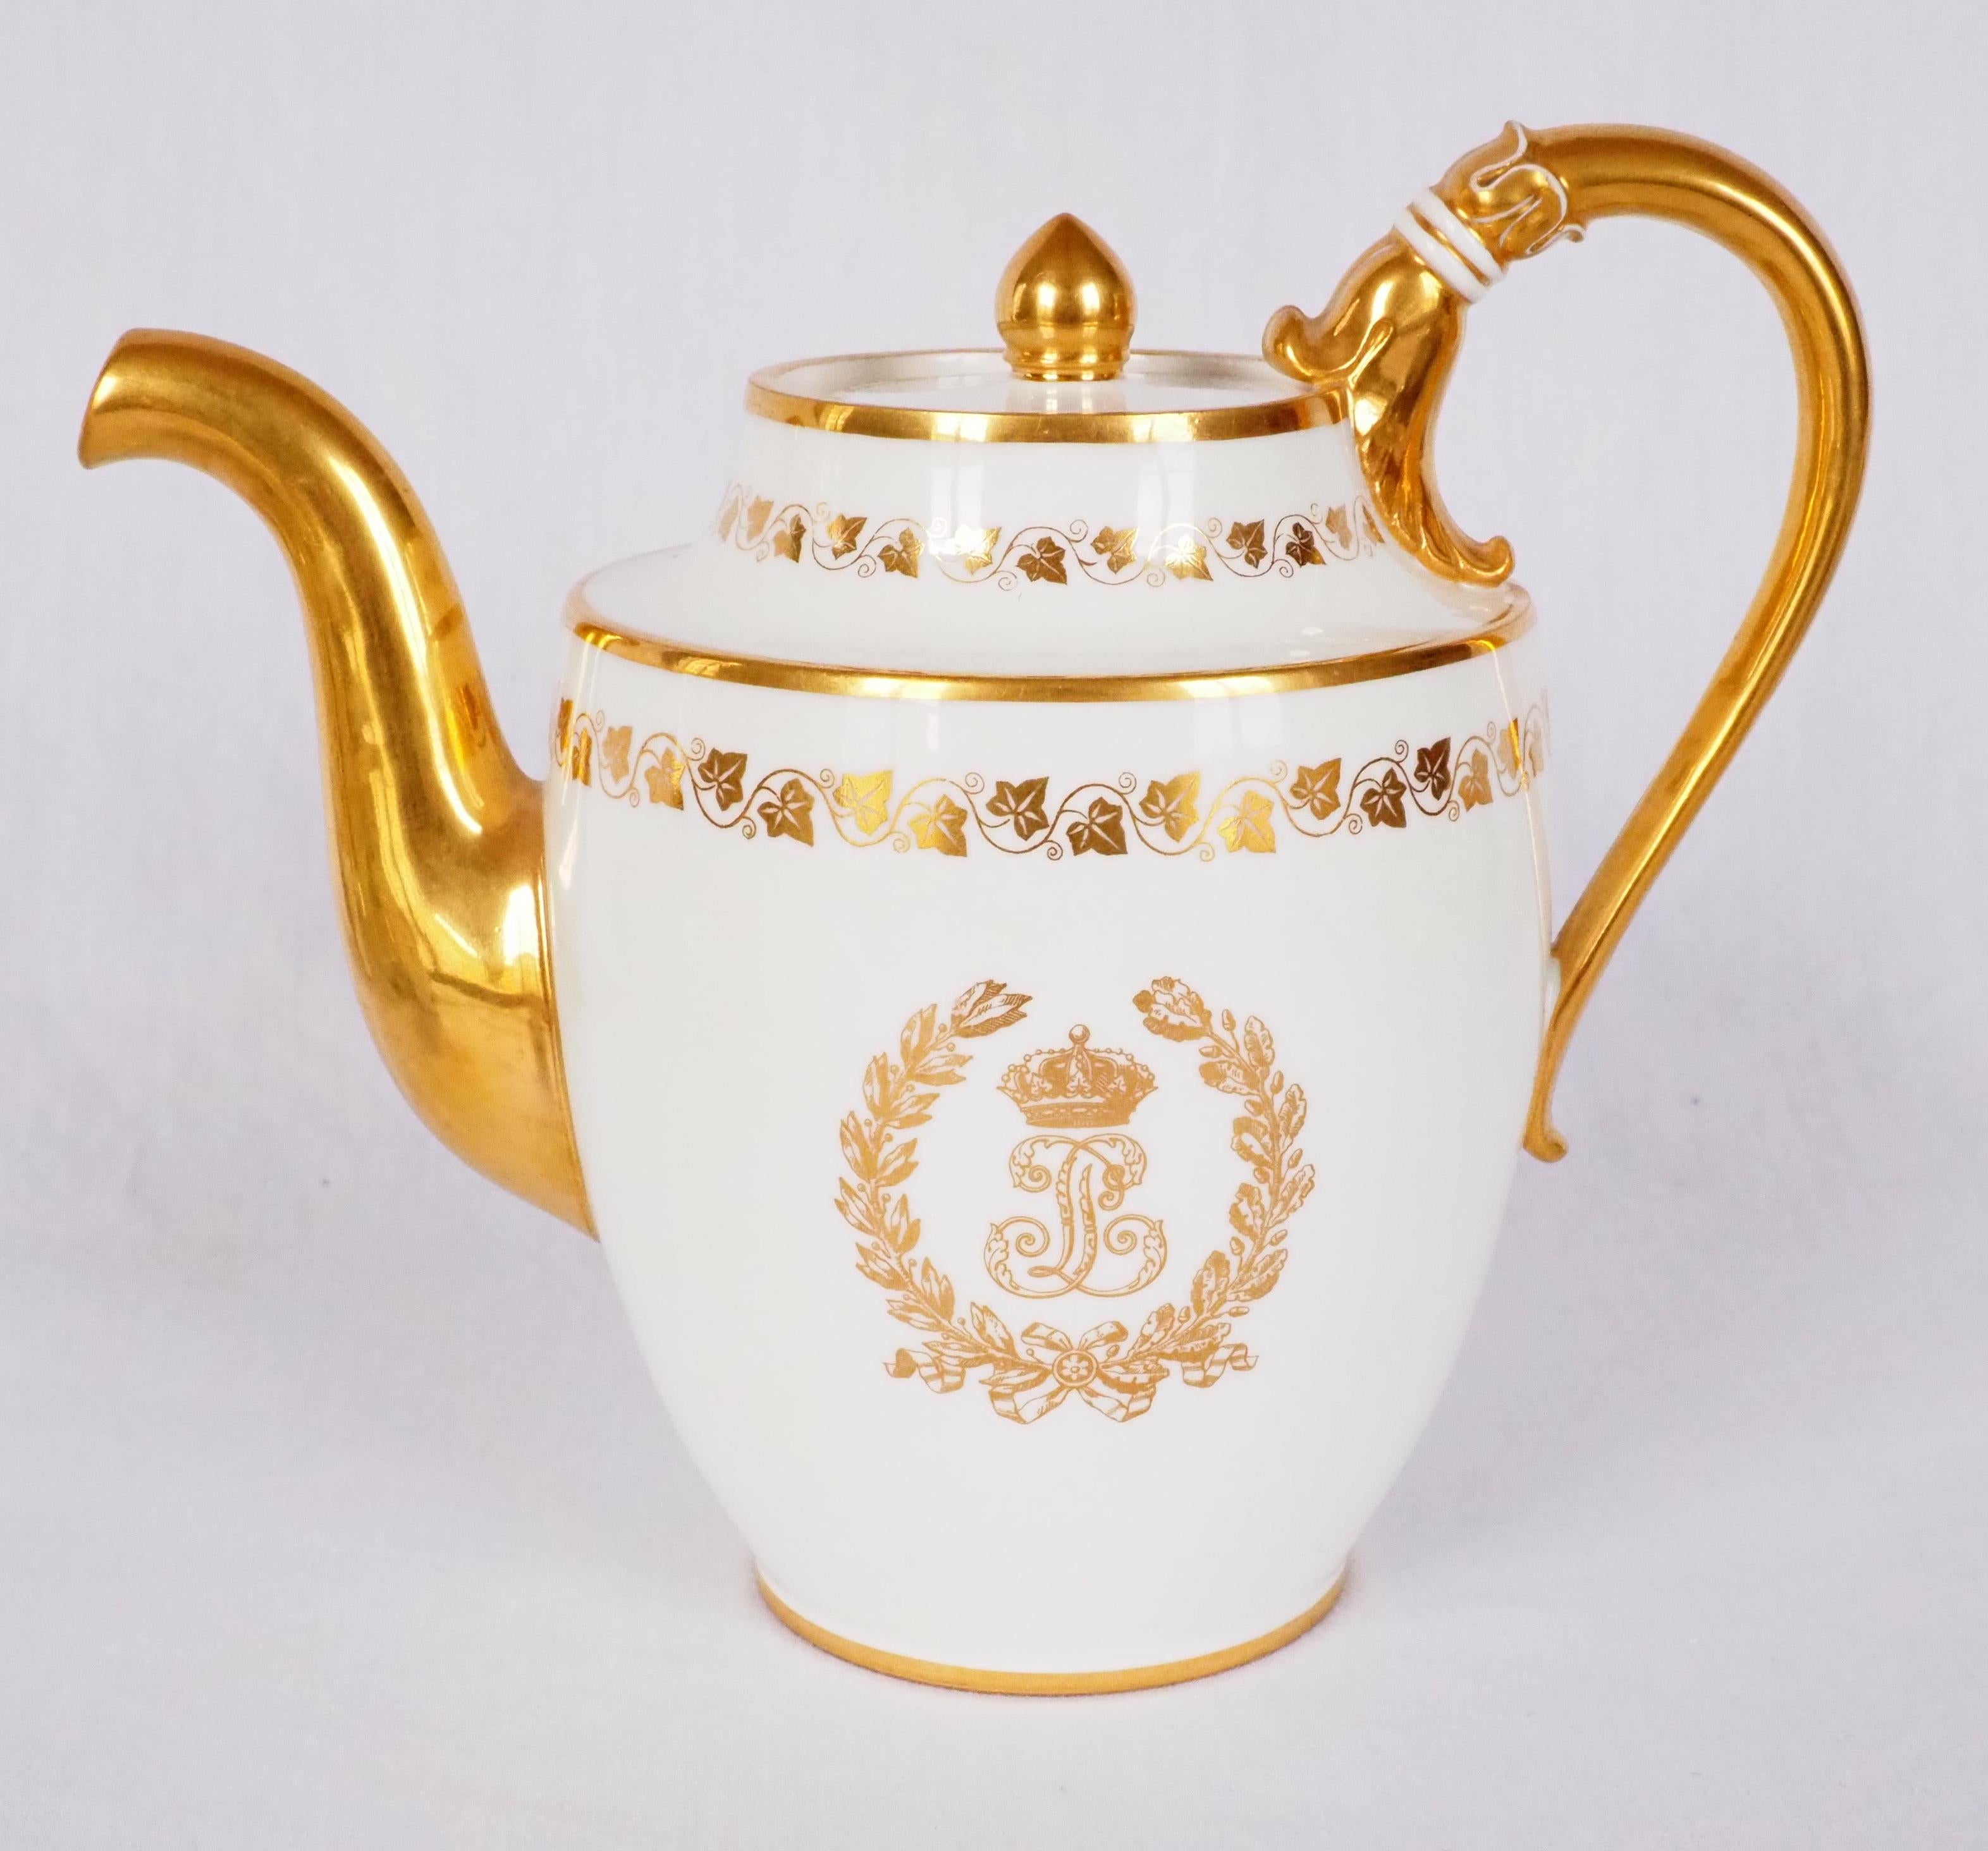 Porcelain teapot or coffee pot from Louis Philippe Princes table set at his royal residence Chateau de Bizy. 19th century production, Imperial Sevres Manufacture circa 1840, signed under the base :
- the blue mark that shows it was manufactured in